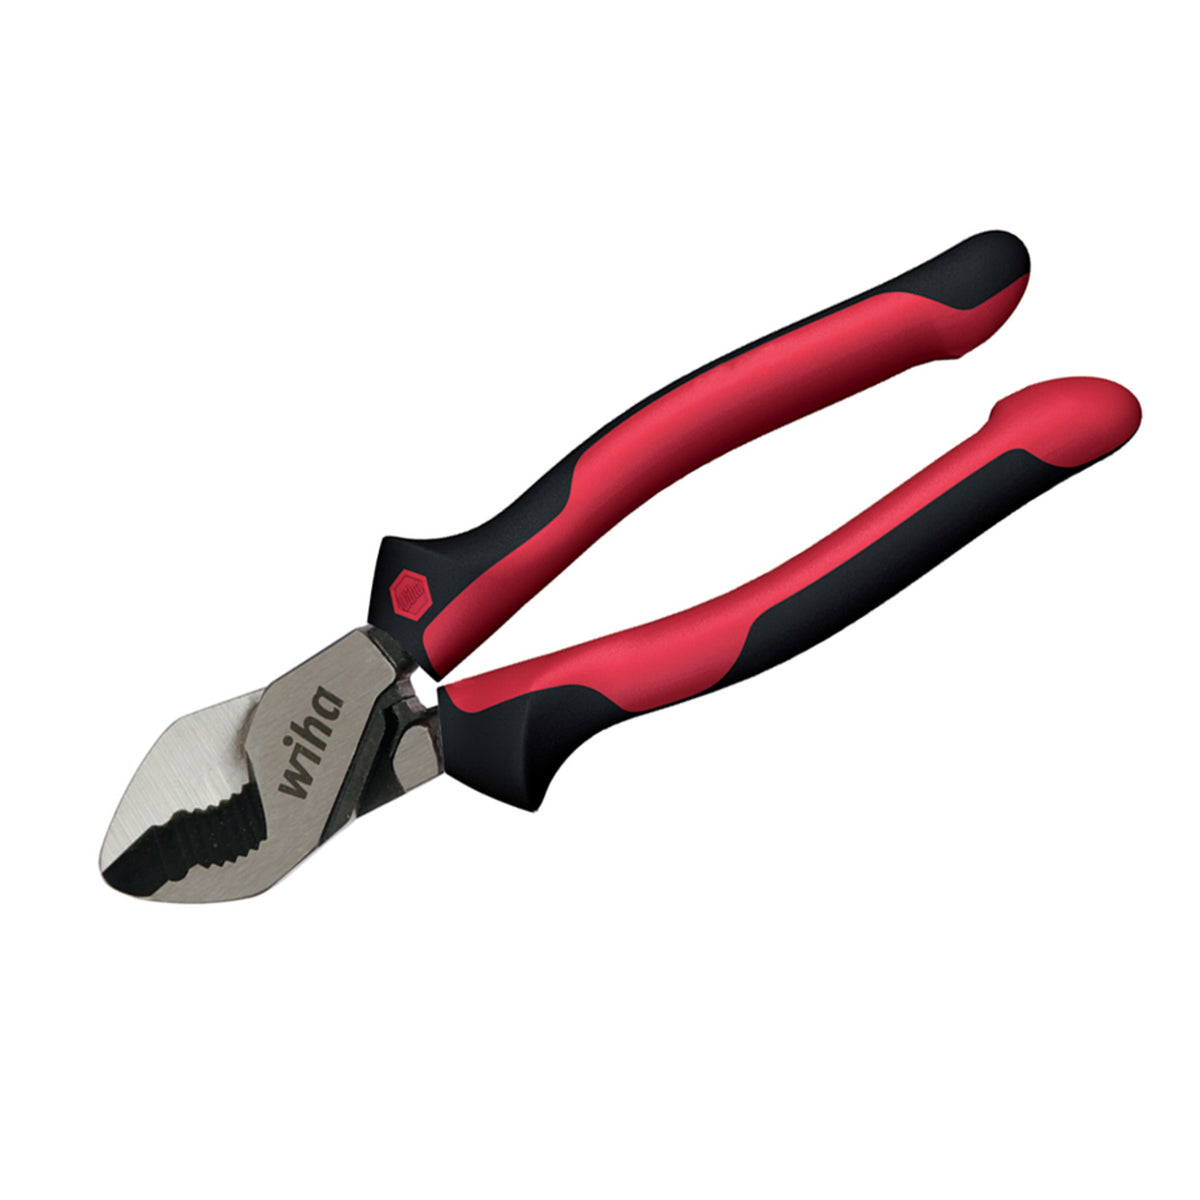 Wiha 30926 Industrial SoftGrip Serrated Cable Cutters 6.3"